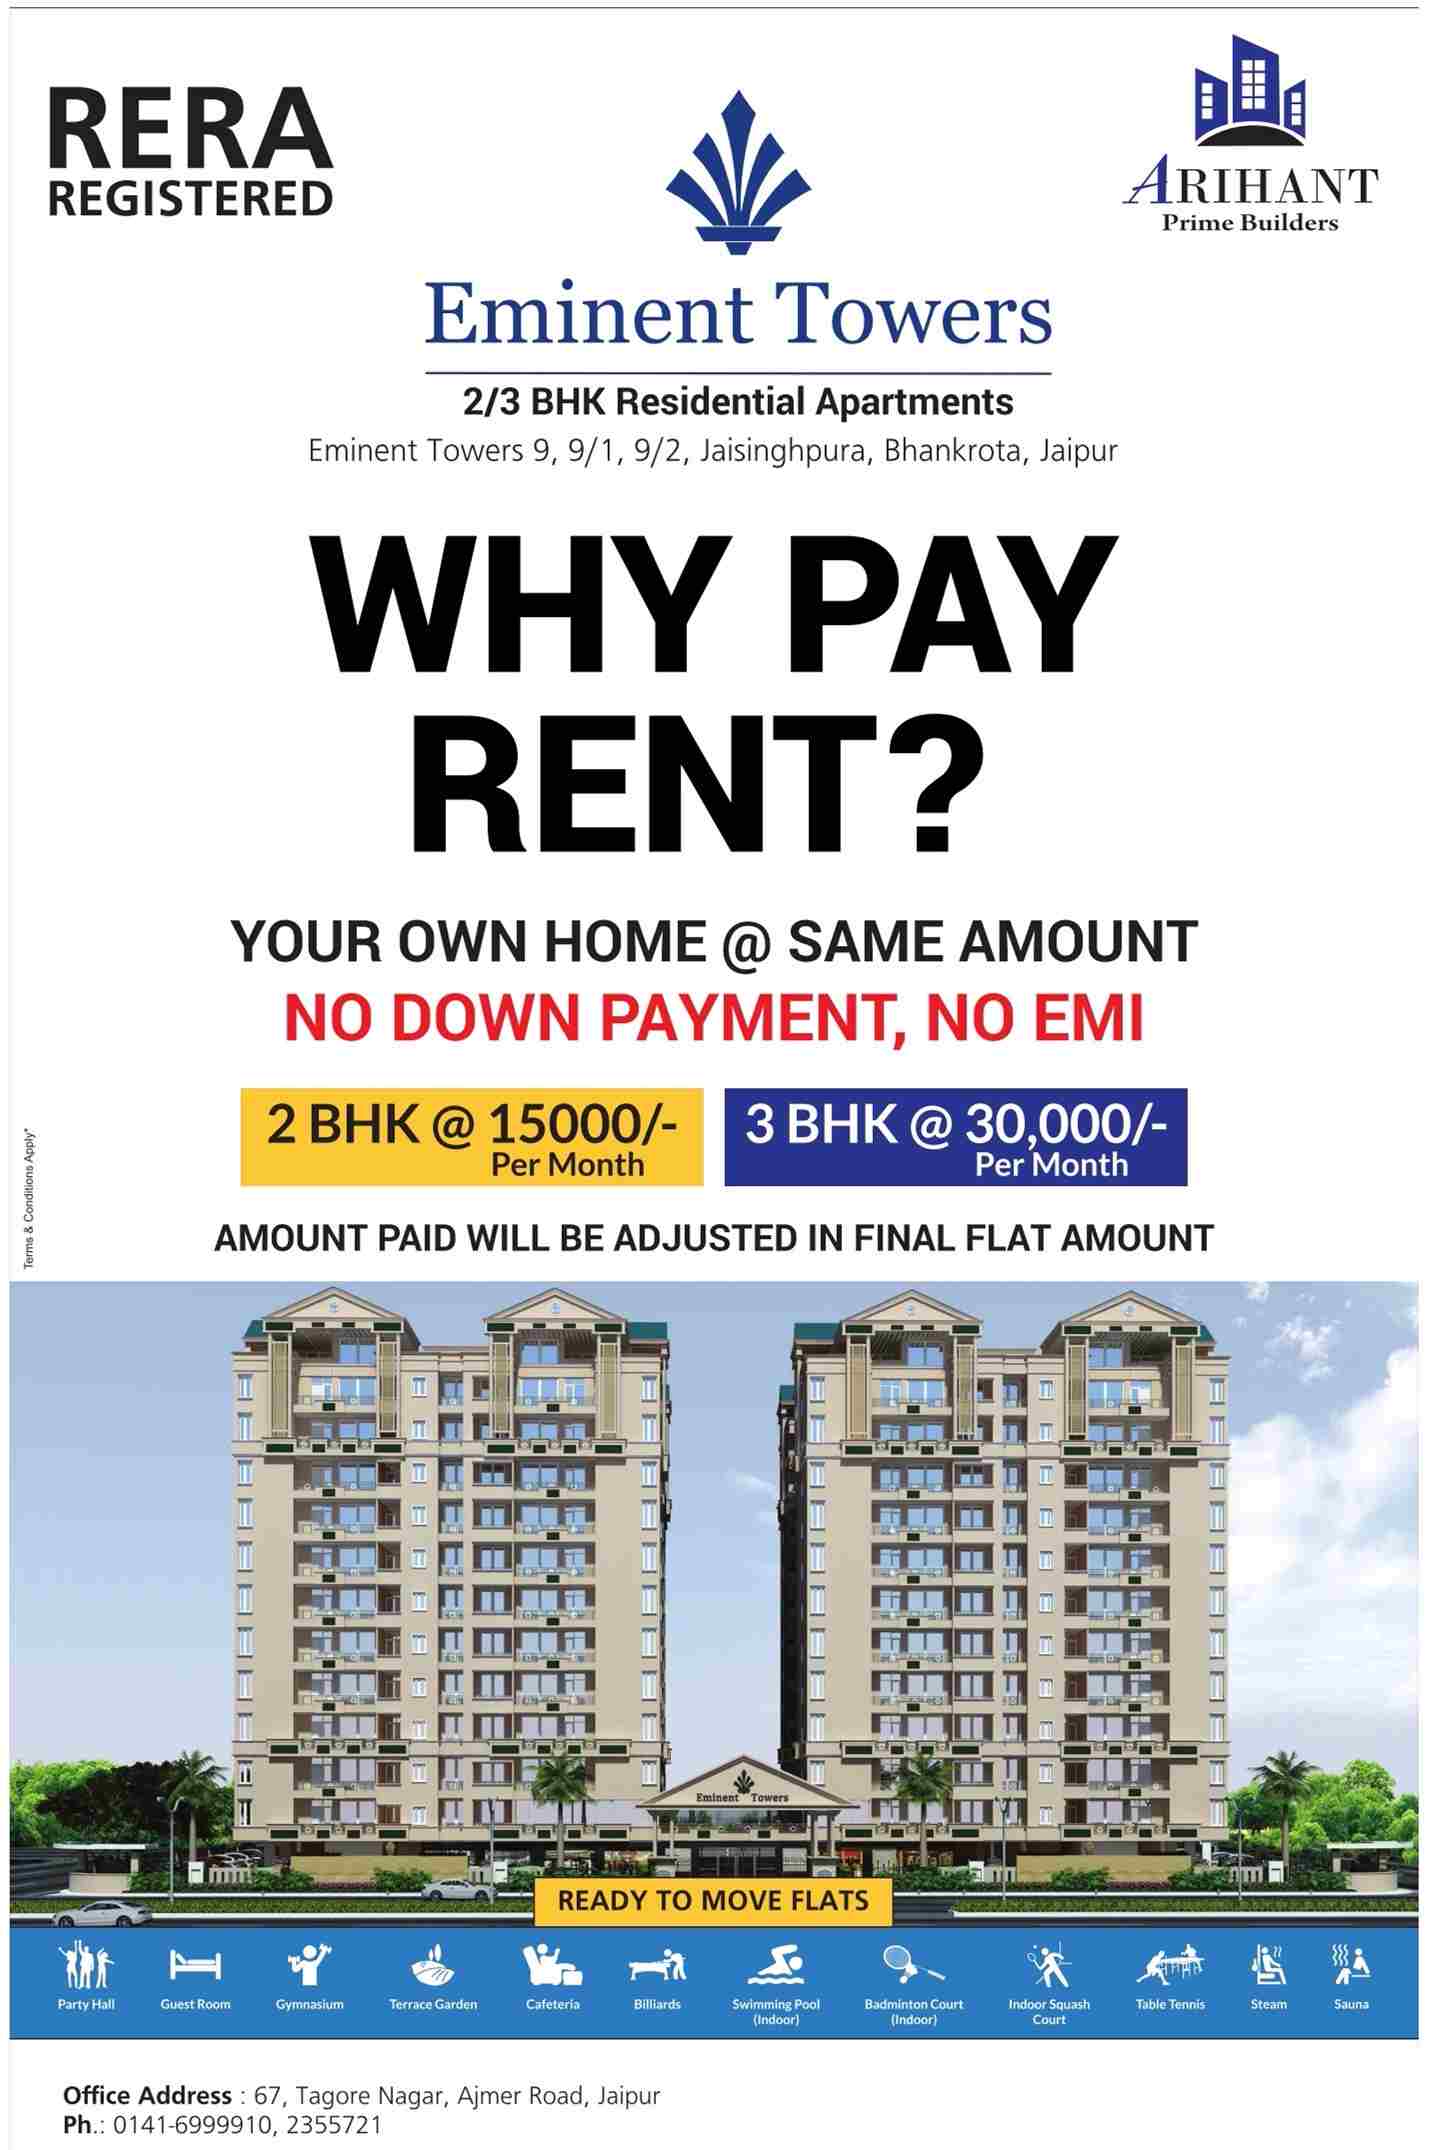 Live in ready to move flats with no down payment & EMI at Arihant Eminent Towers in Jaipur Update